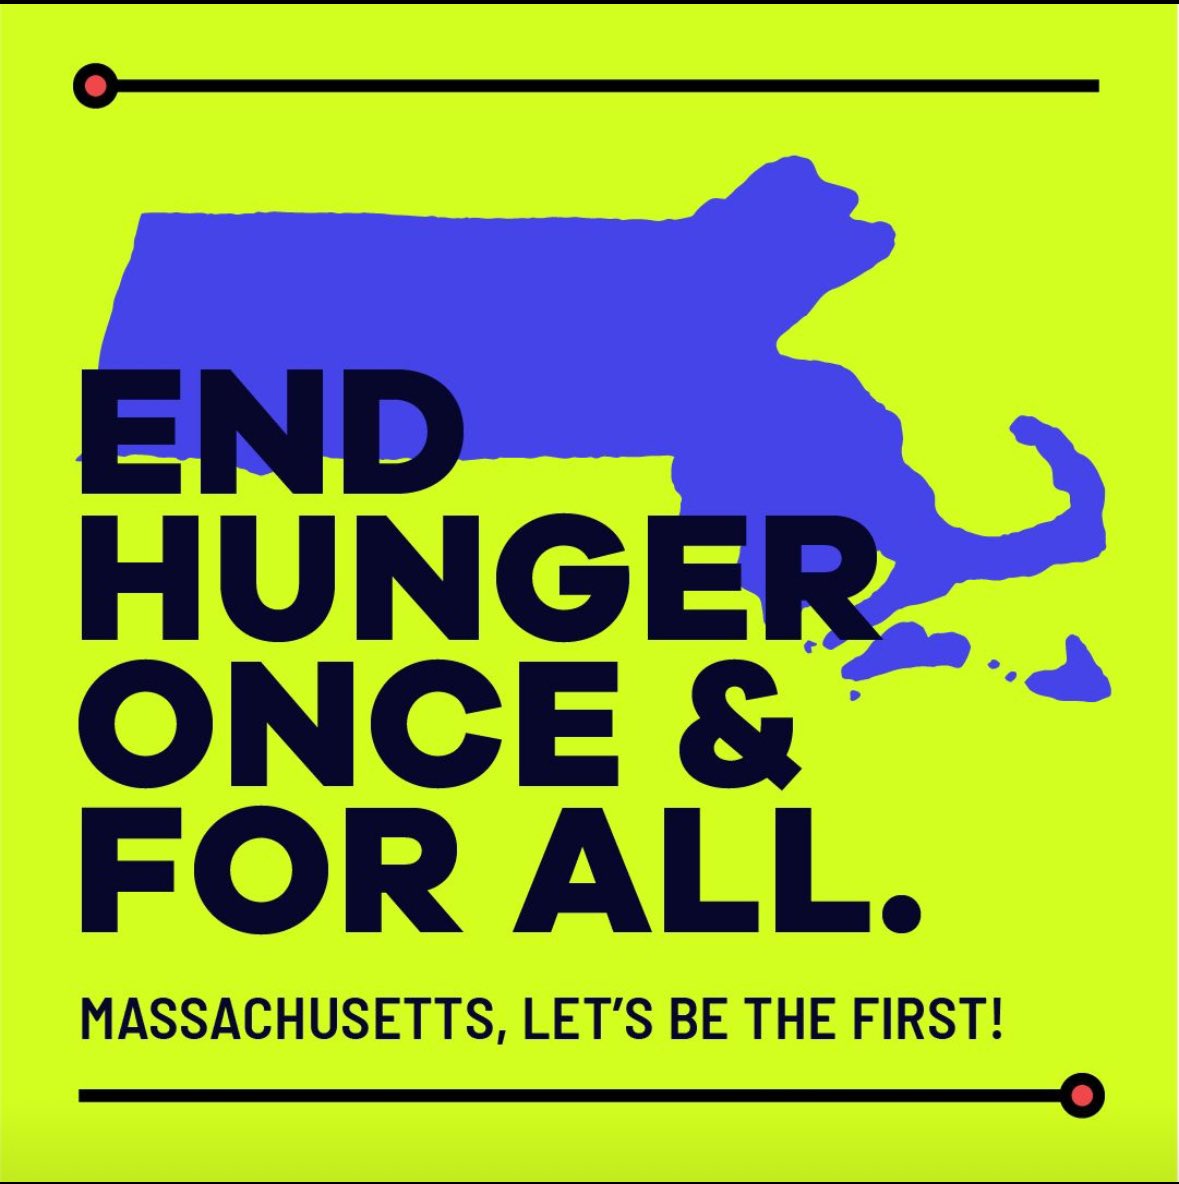 Exciting news! Today @projectbread and our partners are launching the Make Hunger History Coalition. Together, we're drawing and implementing the roadmap to end hunger in Massachusetts - for good. #MakeHungerHistoryMA #EndHunger